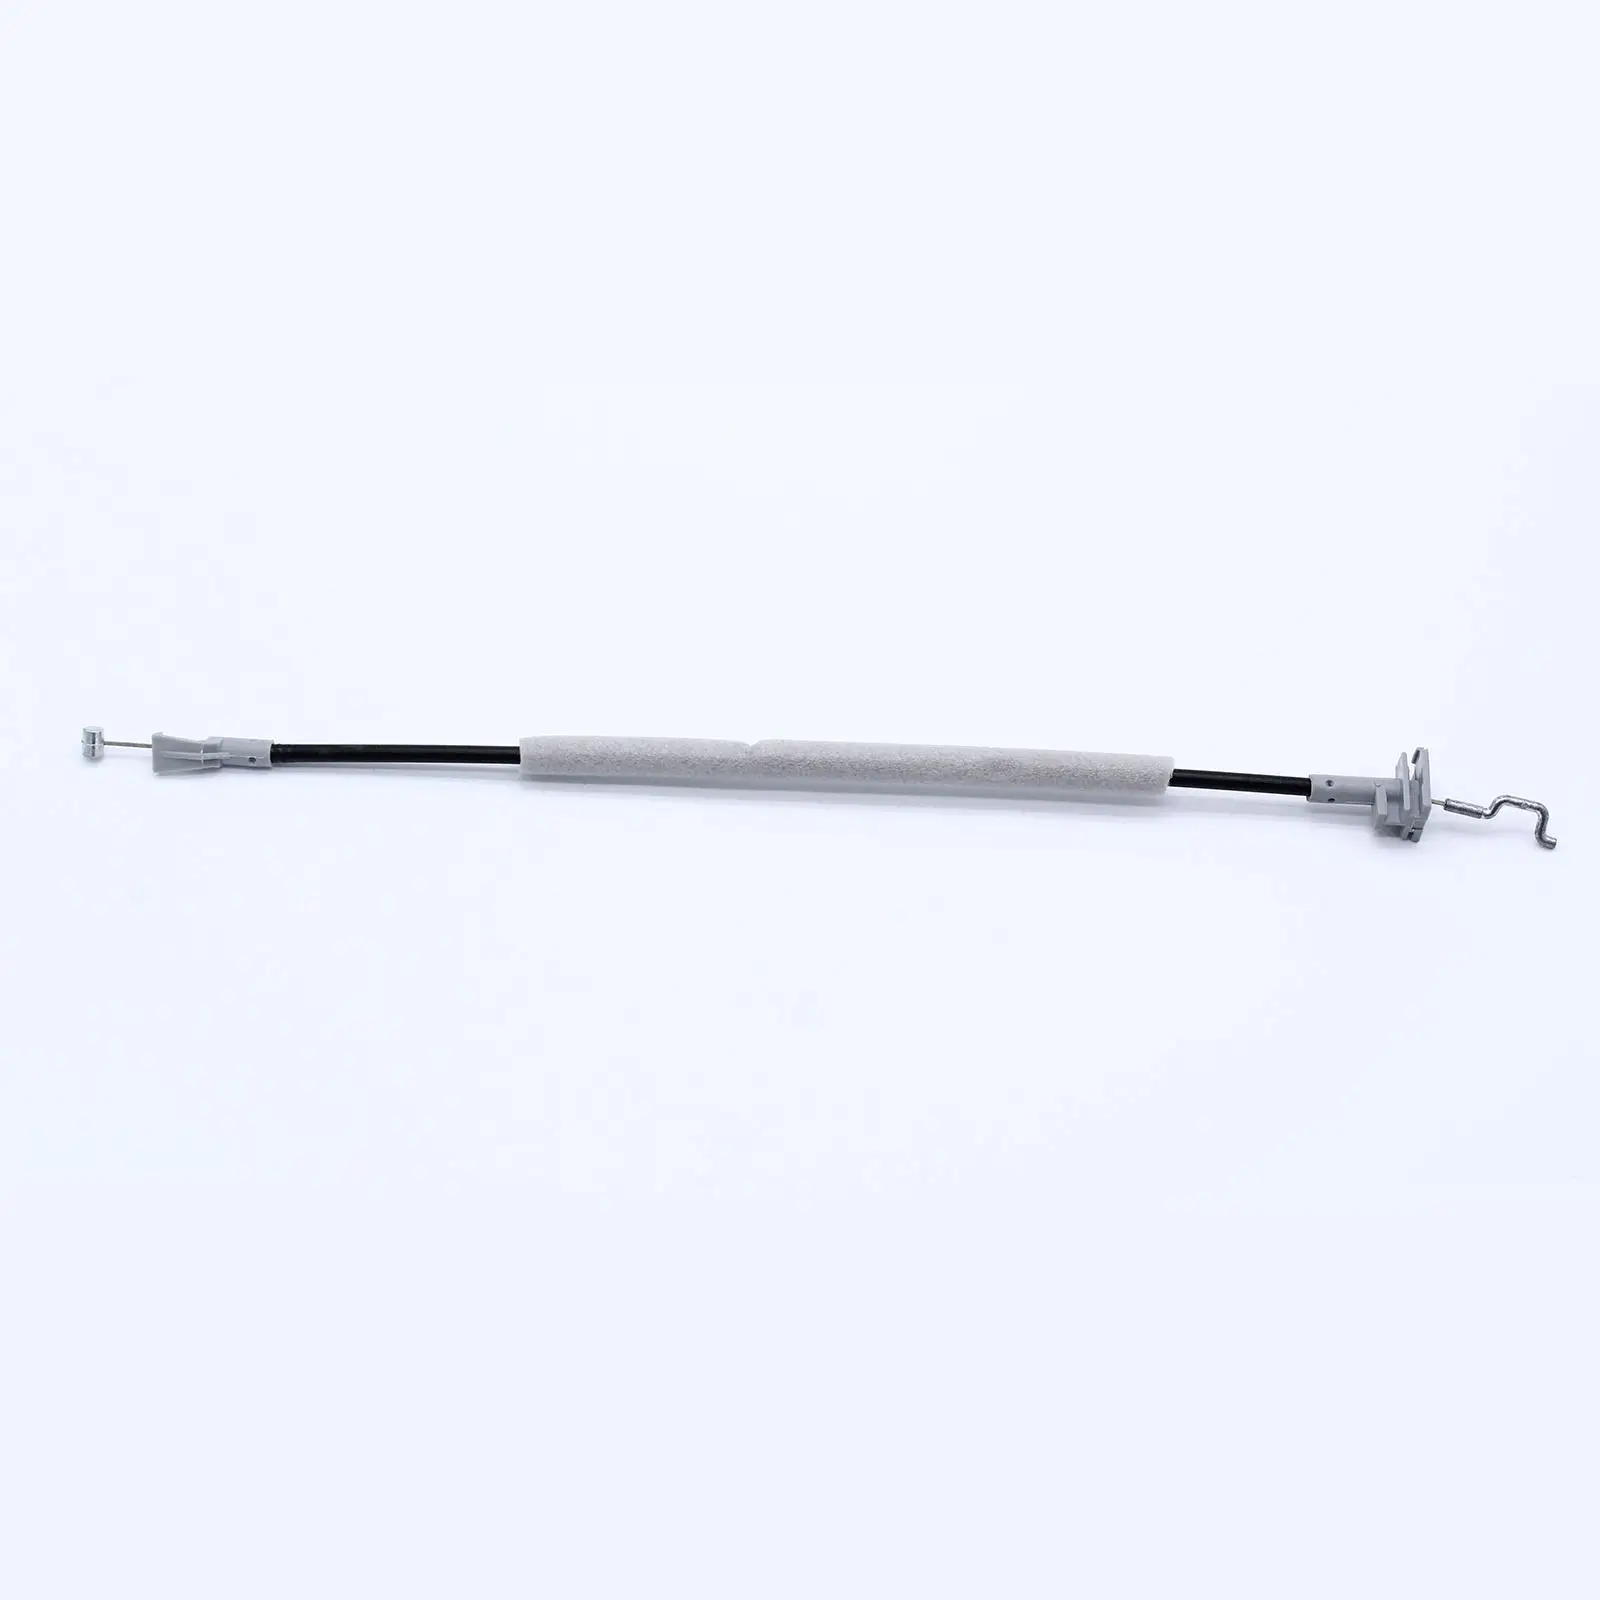 Car Door Lock Release Rod Fits for Vauxhall Signum 137822 Replace Part